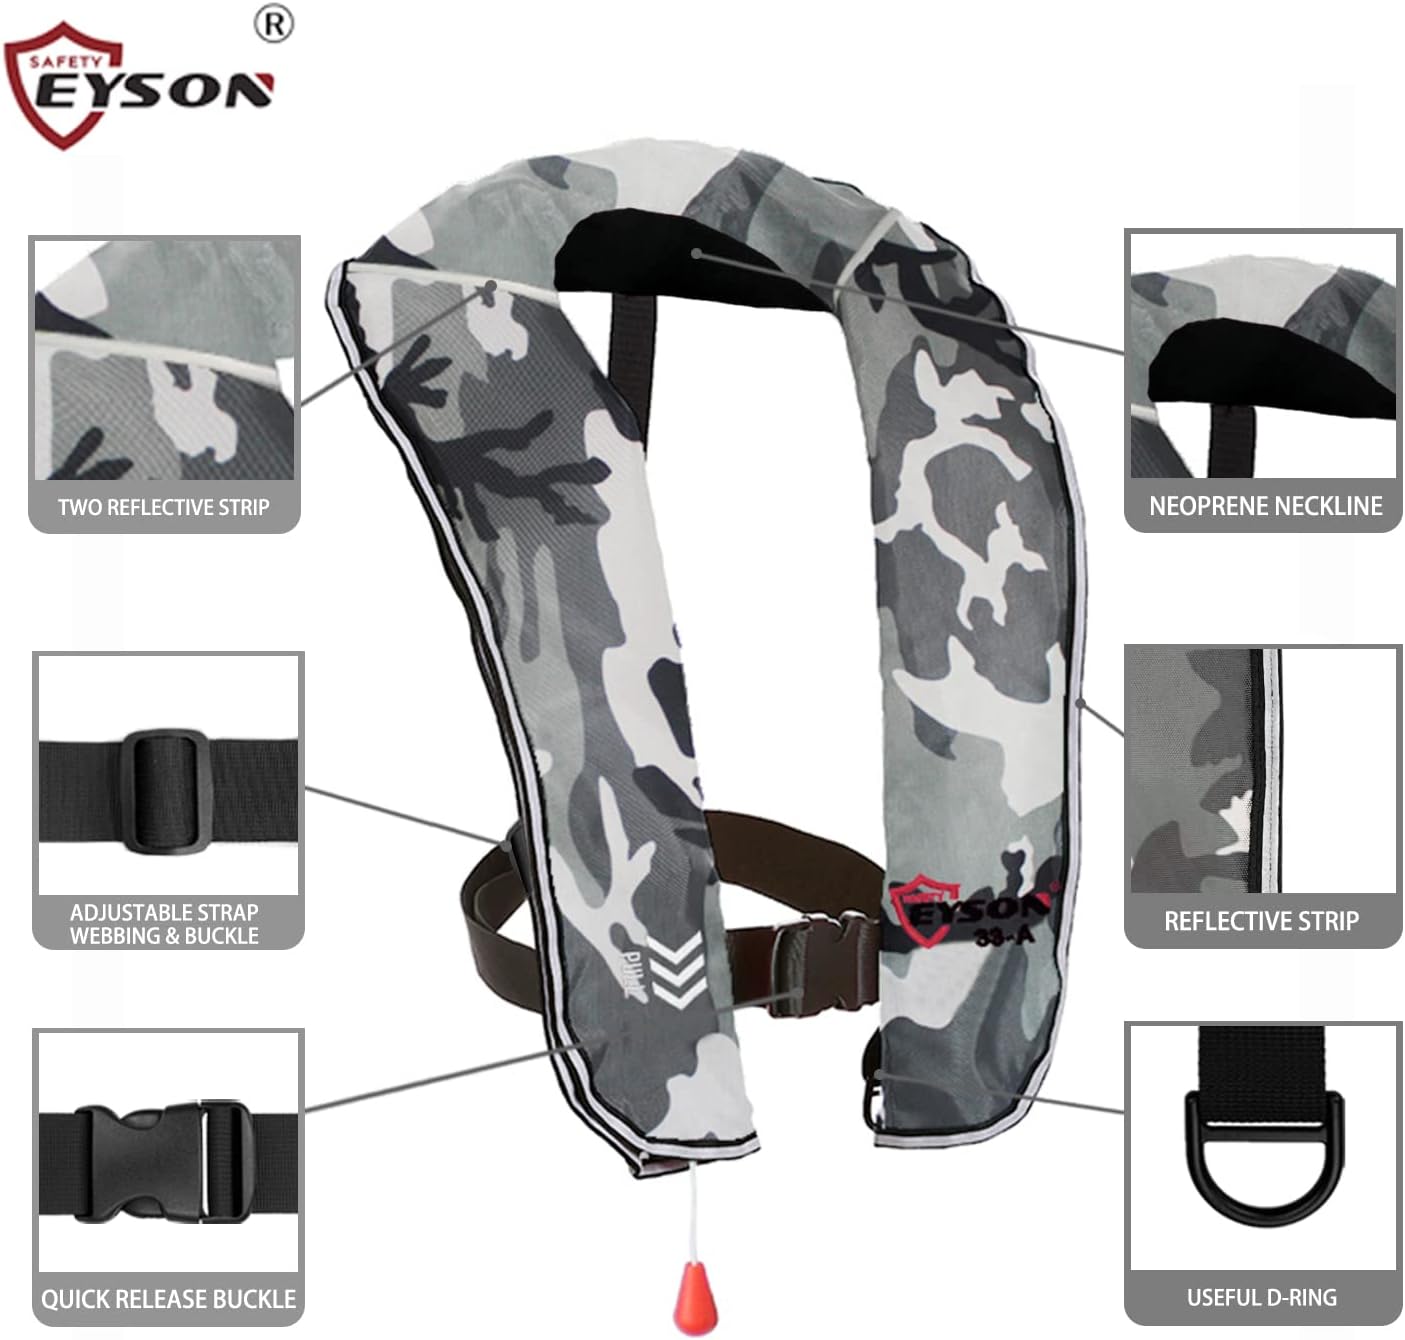 Eyson Inflatable Life Jacket Review